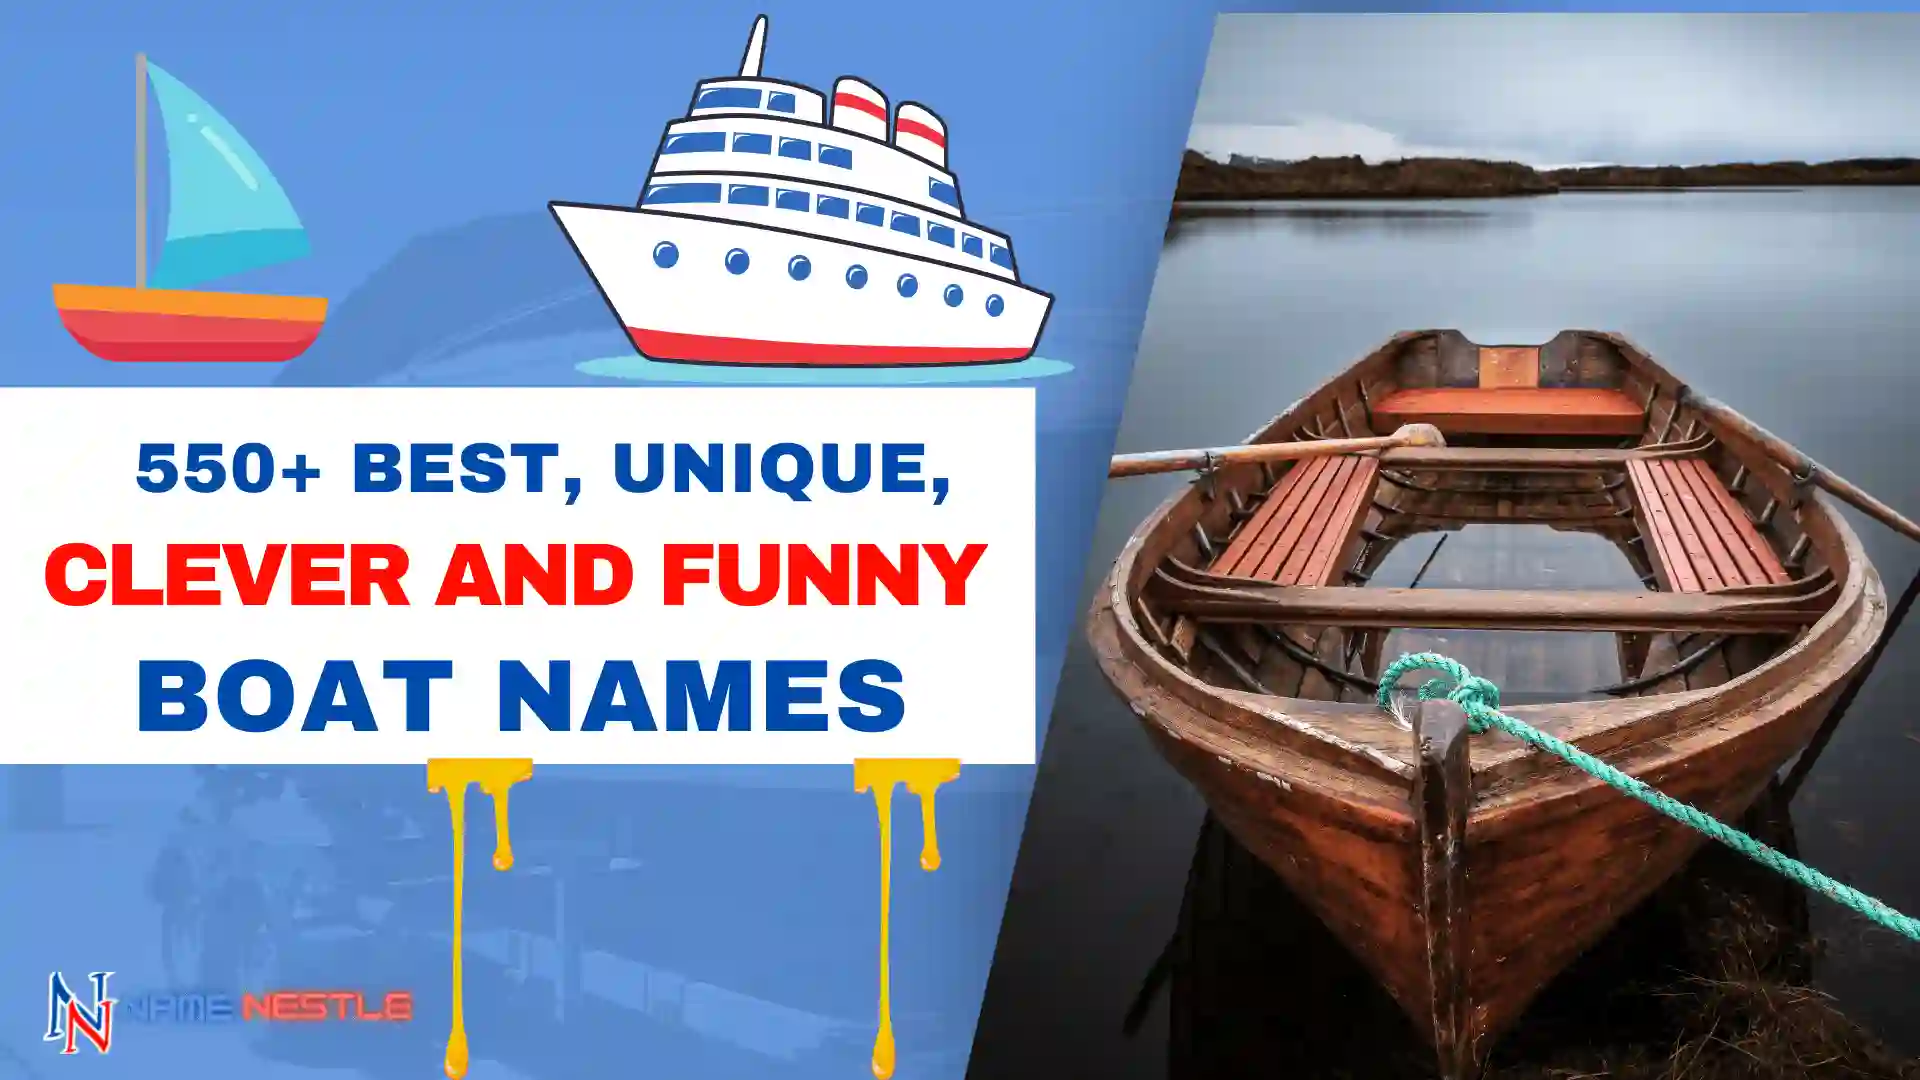 Captivating and Creative Boat Names to Brighten Your Day